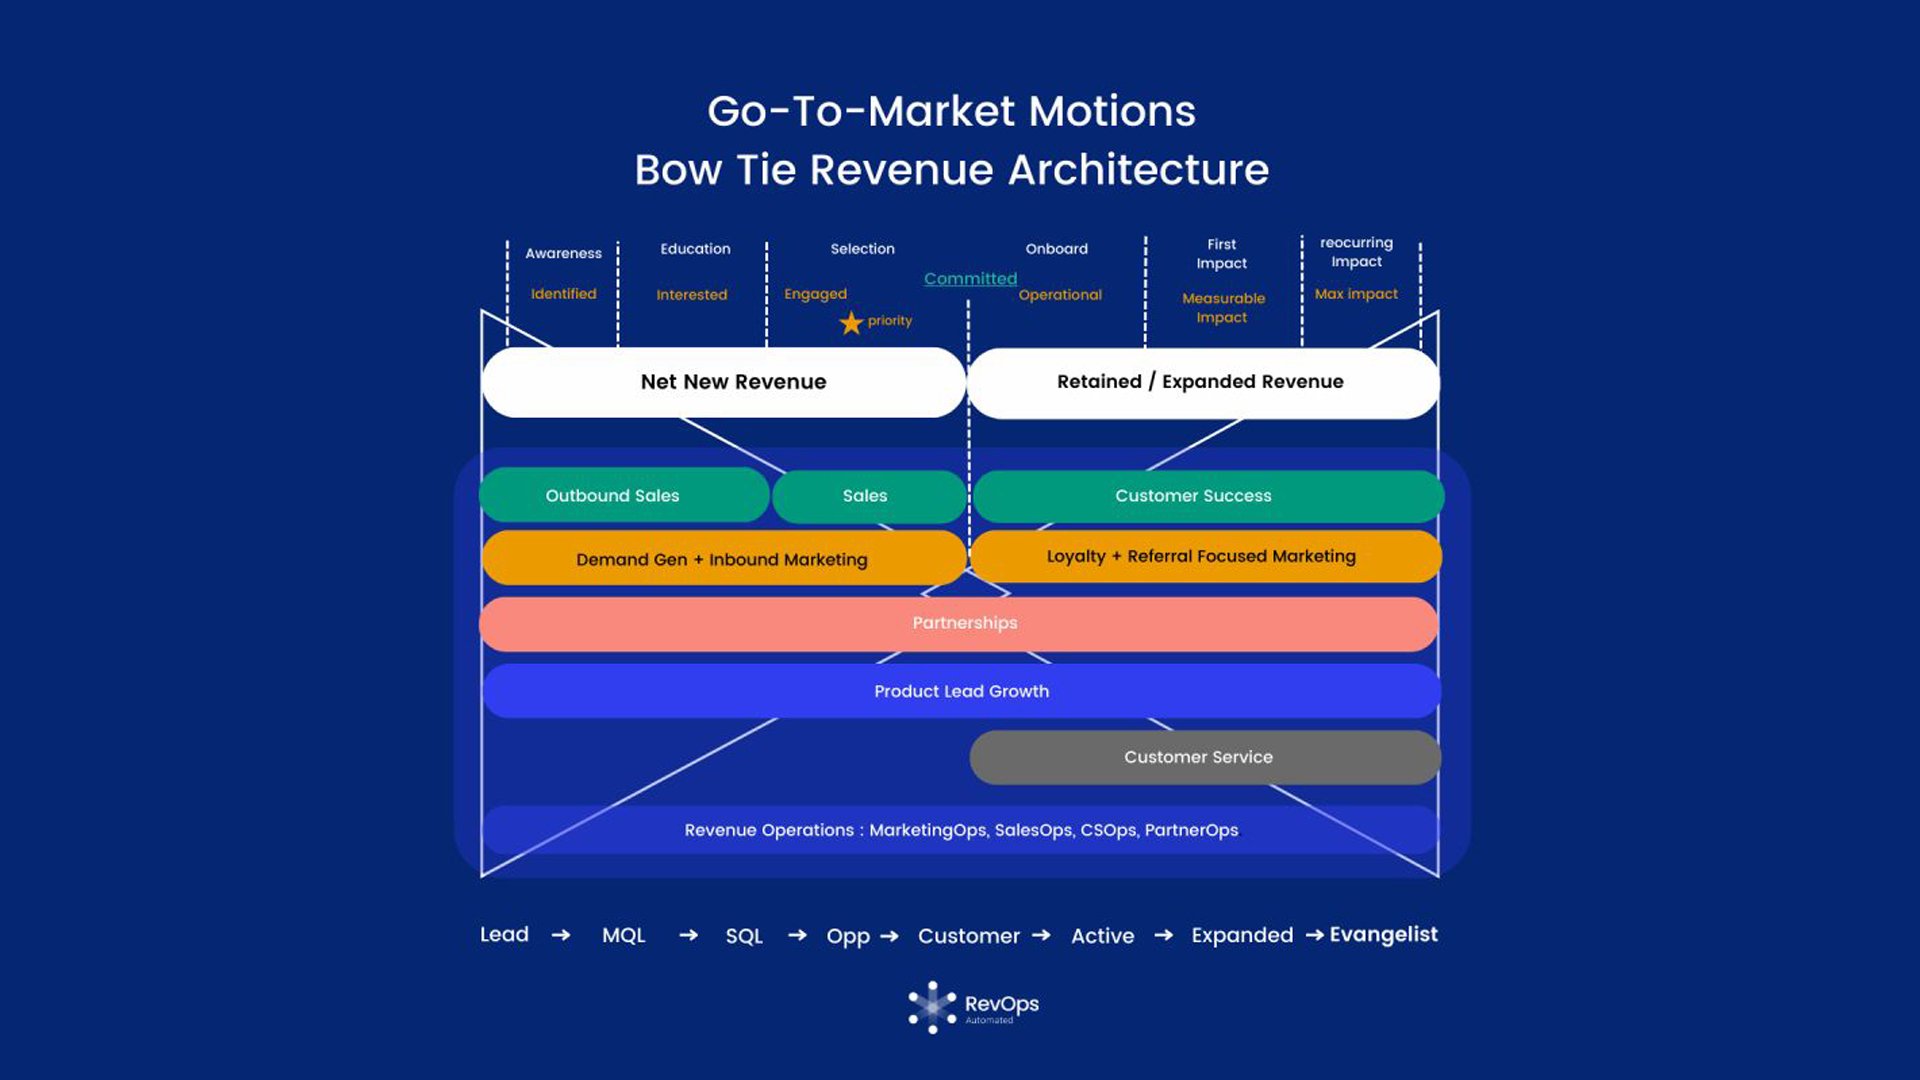 Which go-to-market motion will result in the best ROI?